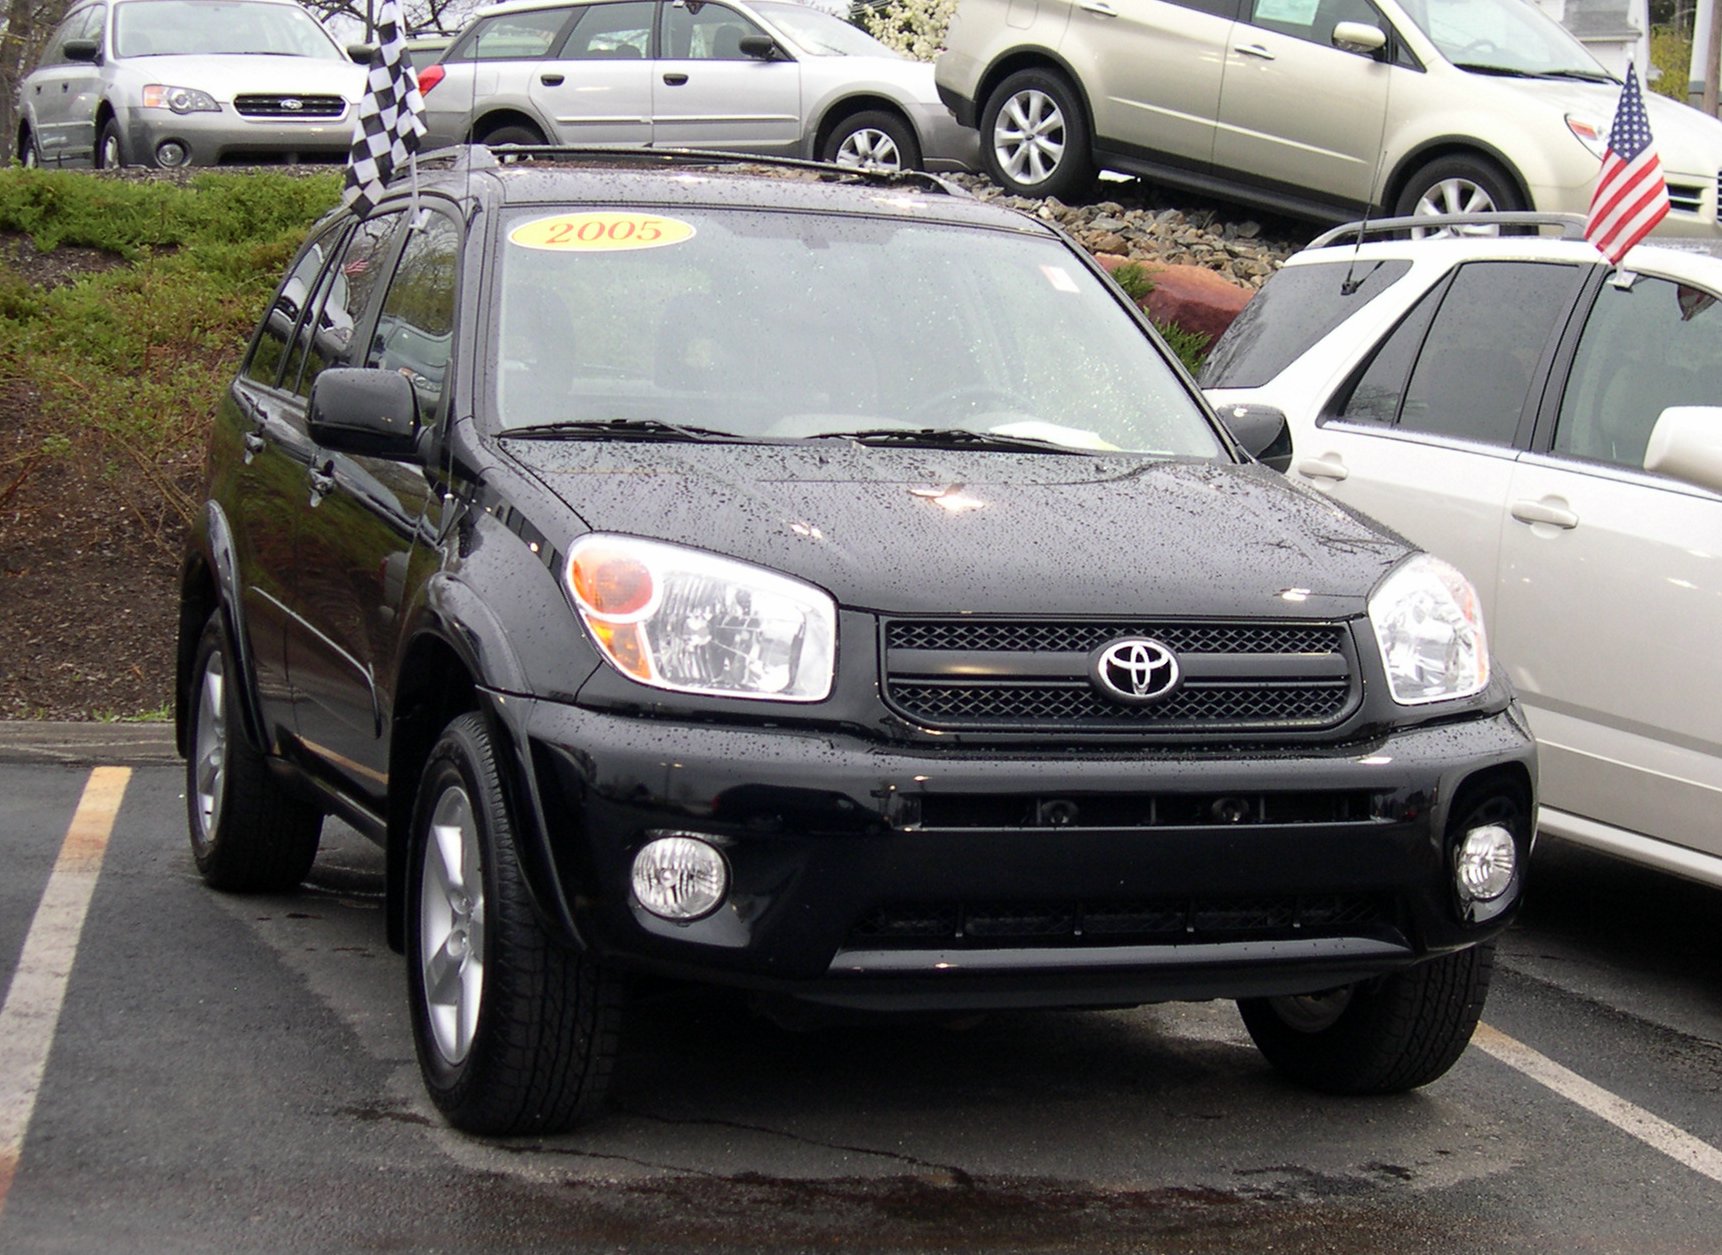 Toyota RAV4 2004 Review, Amazing Pictures and Images